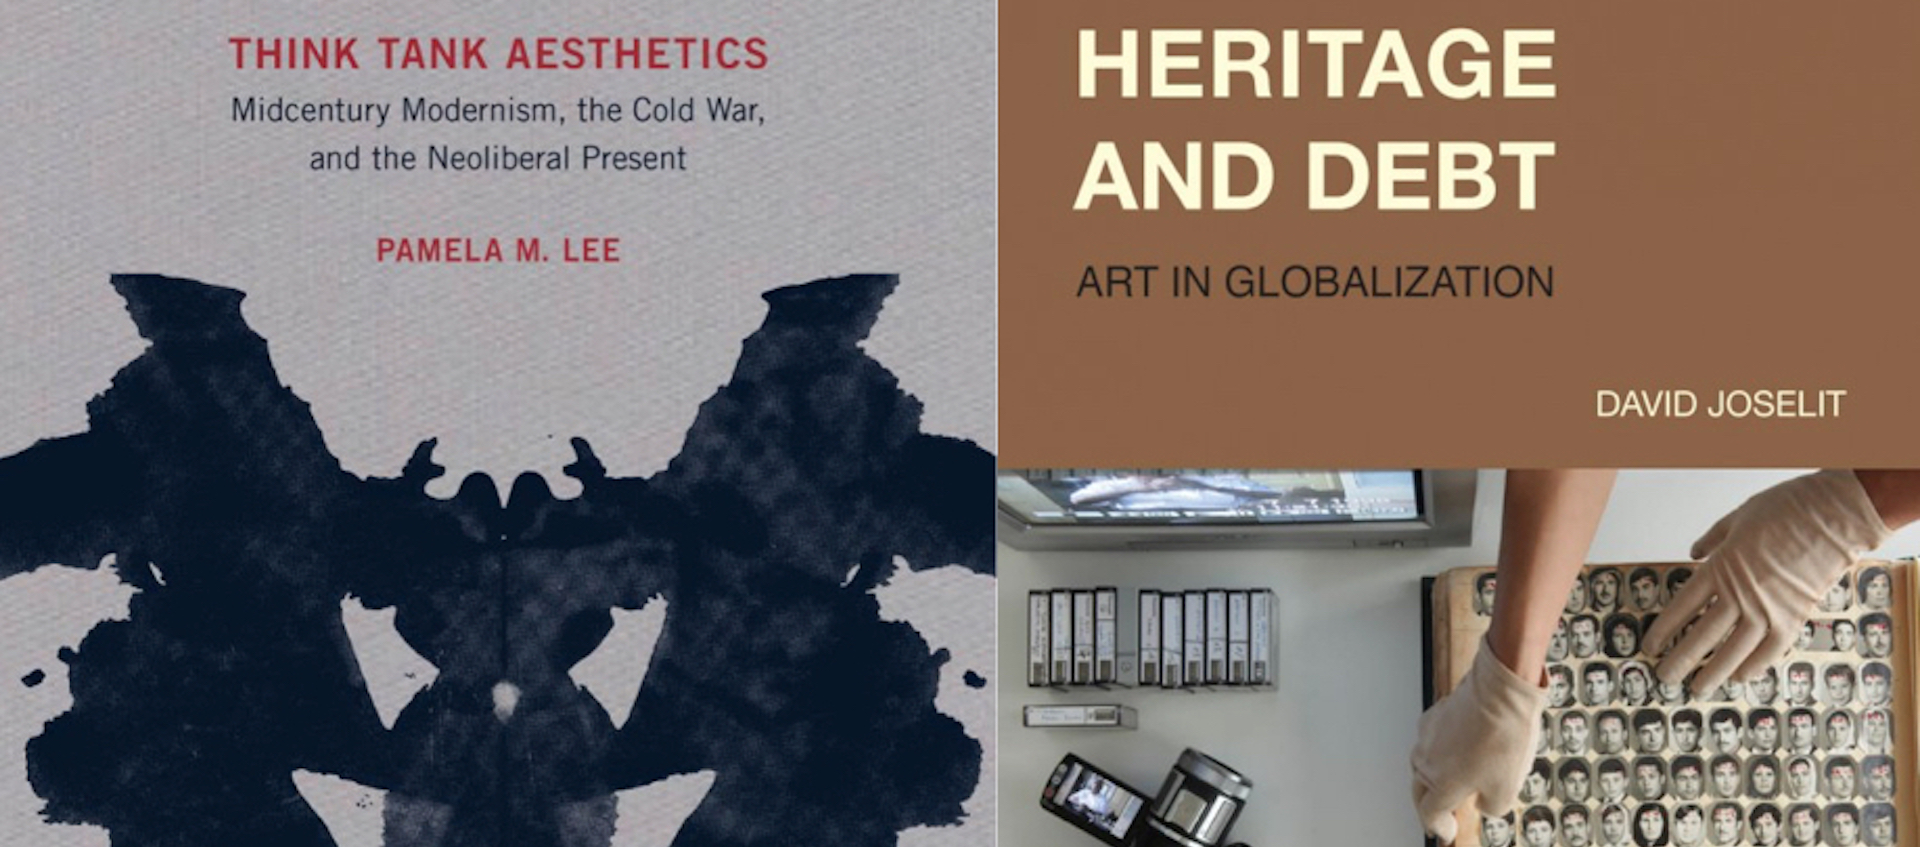 Book covers for Think Tank Aesthetics by Pamela M. Lee and Heritage and Debt by David Joselit